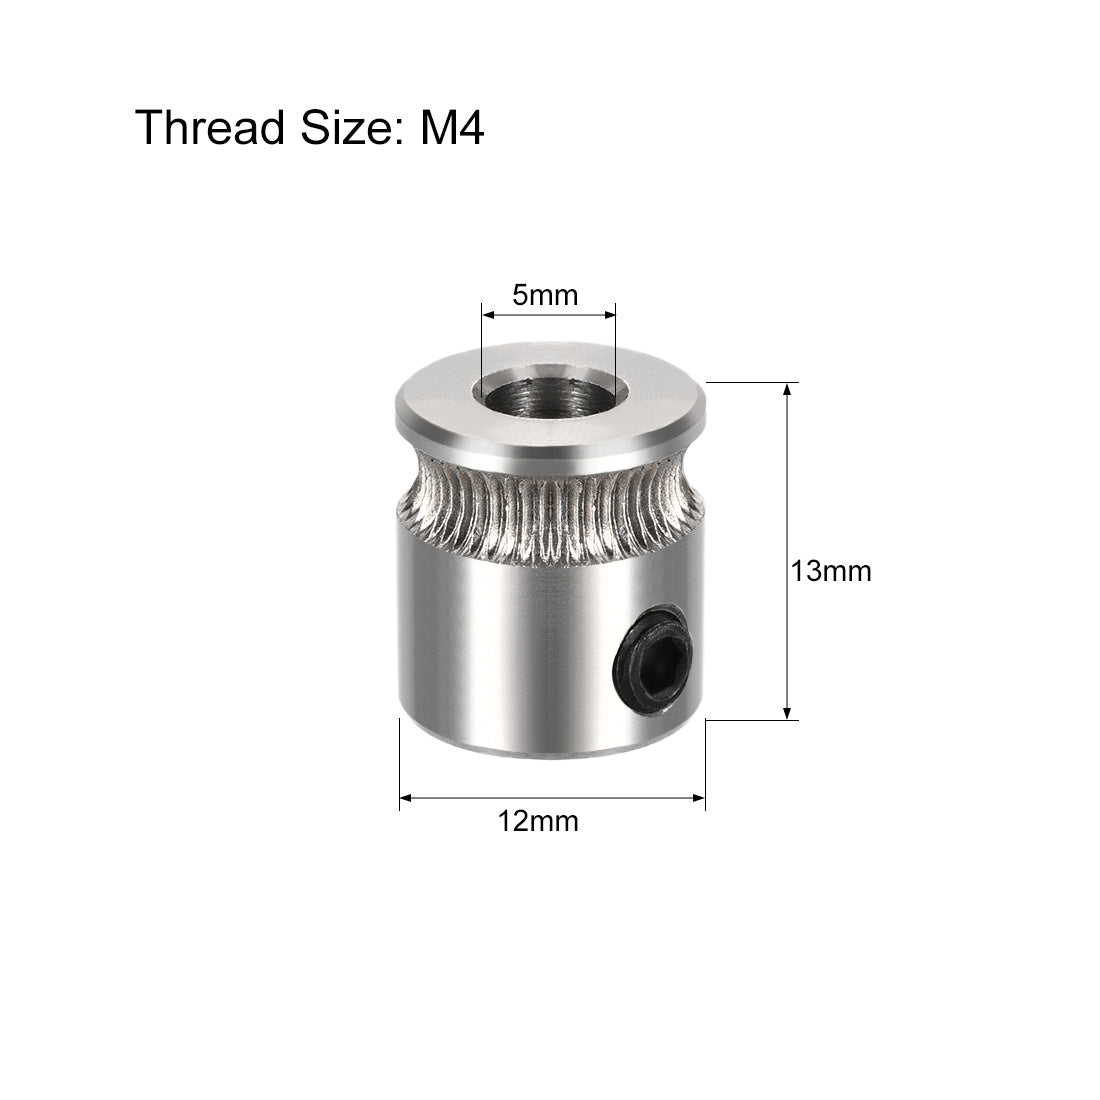 uxcell Uxcell MK7 Drive Gear Direct Extruder Drive 5mm Bore for Extruder 5pcs